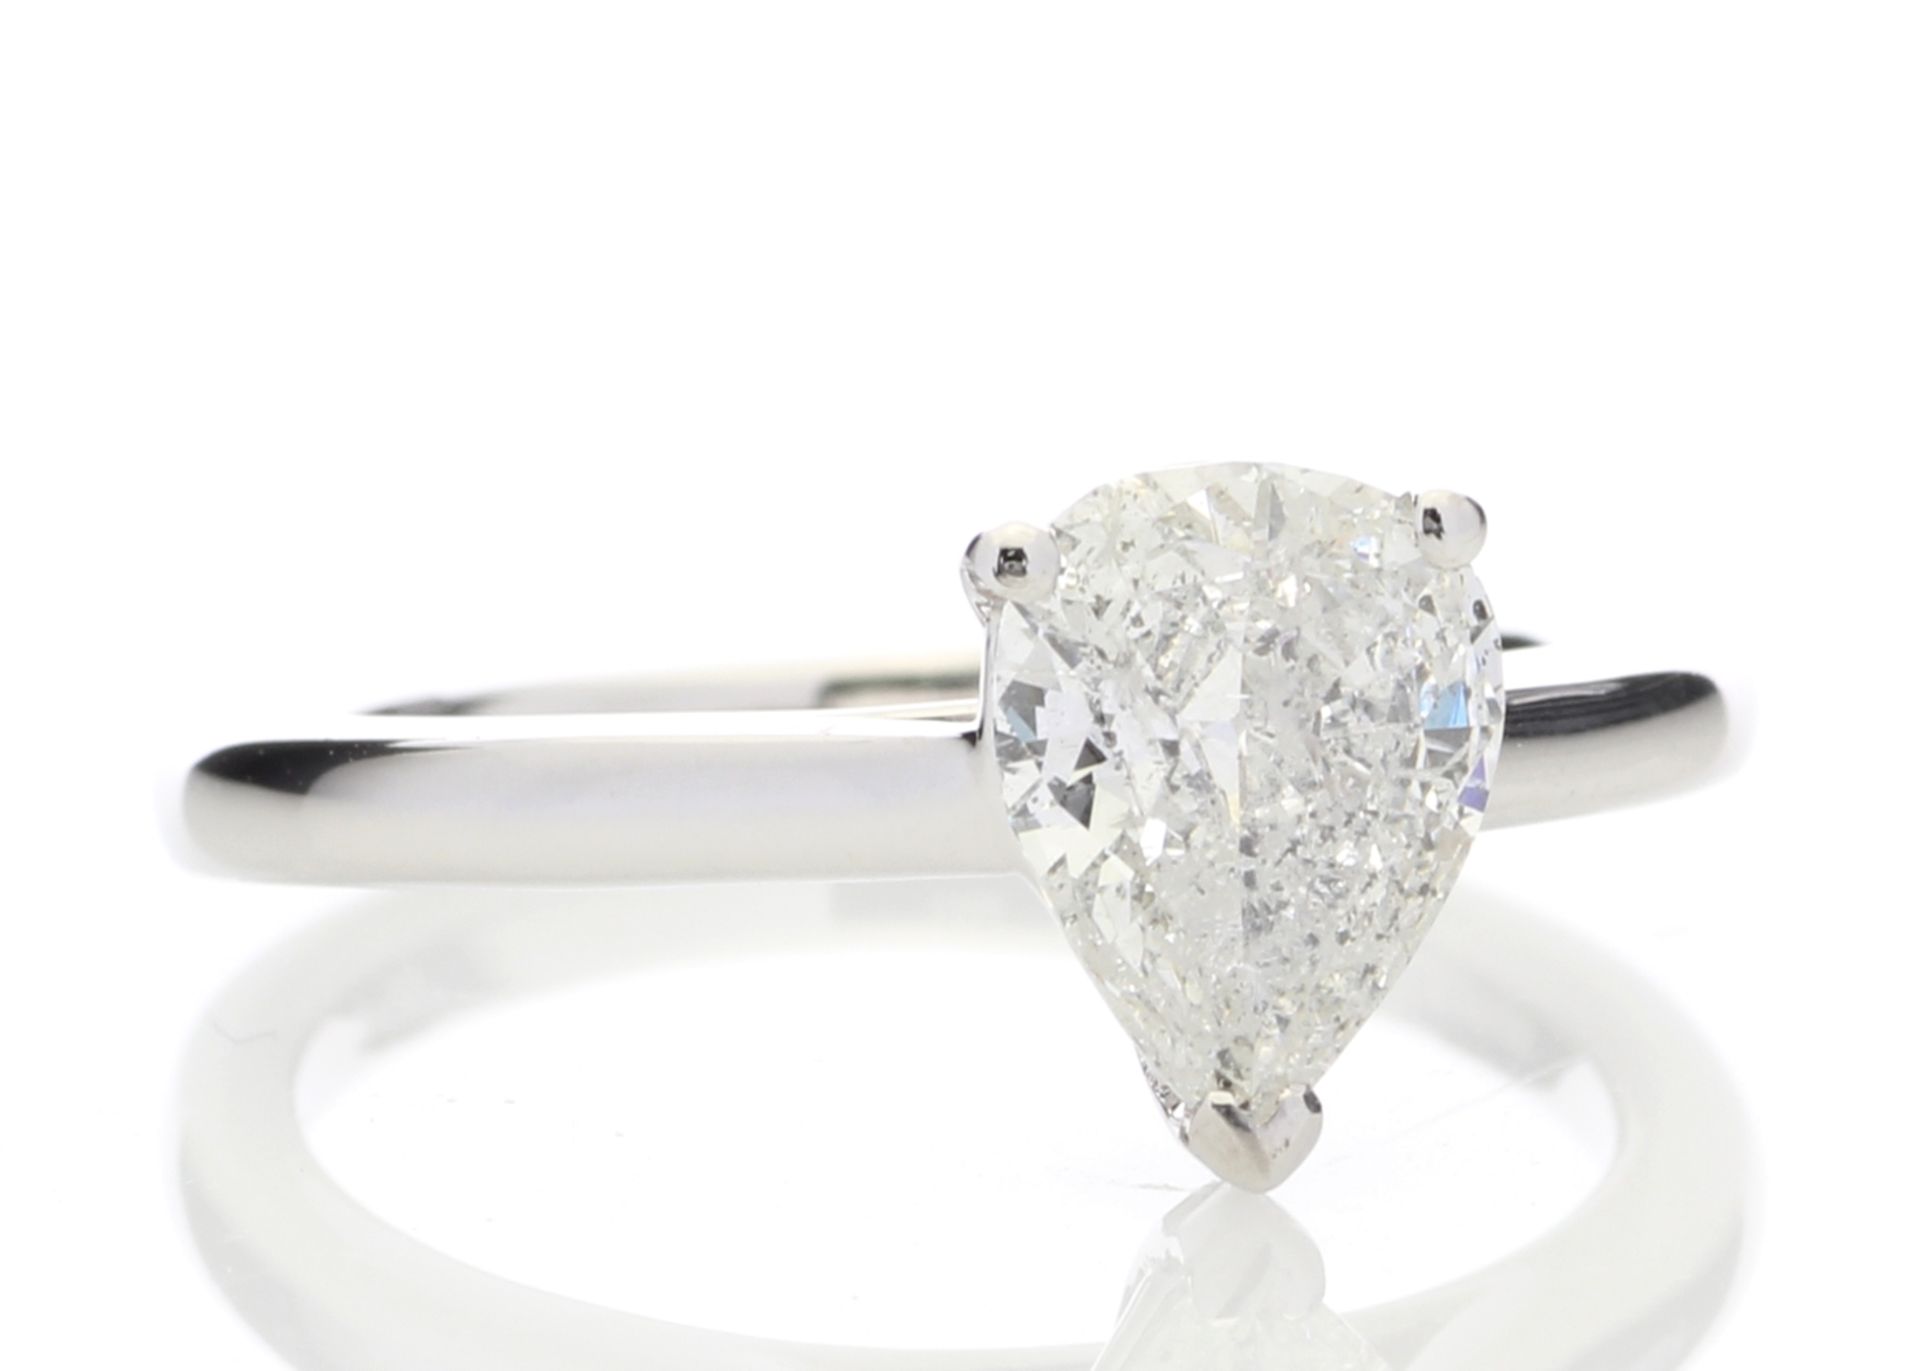 18ct White Gold Pear Cut Diamond Ring 1.02 Carats - Valued By GIE £18,350.00 - One stunning - Image 4 of 5